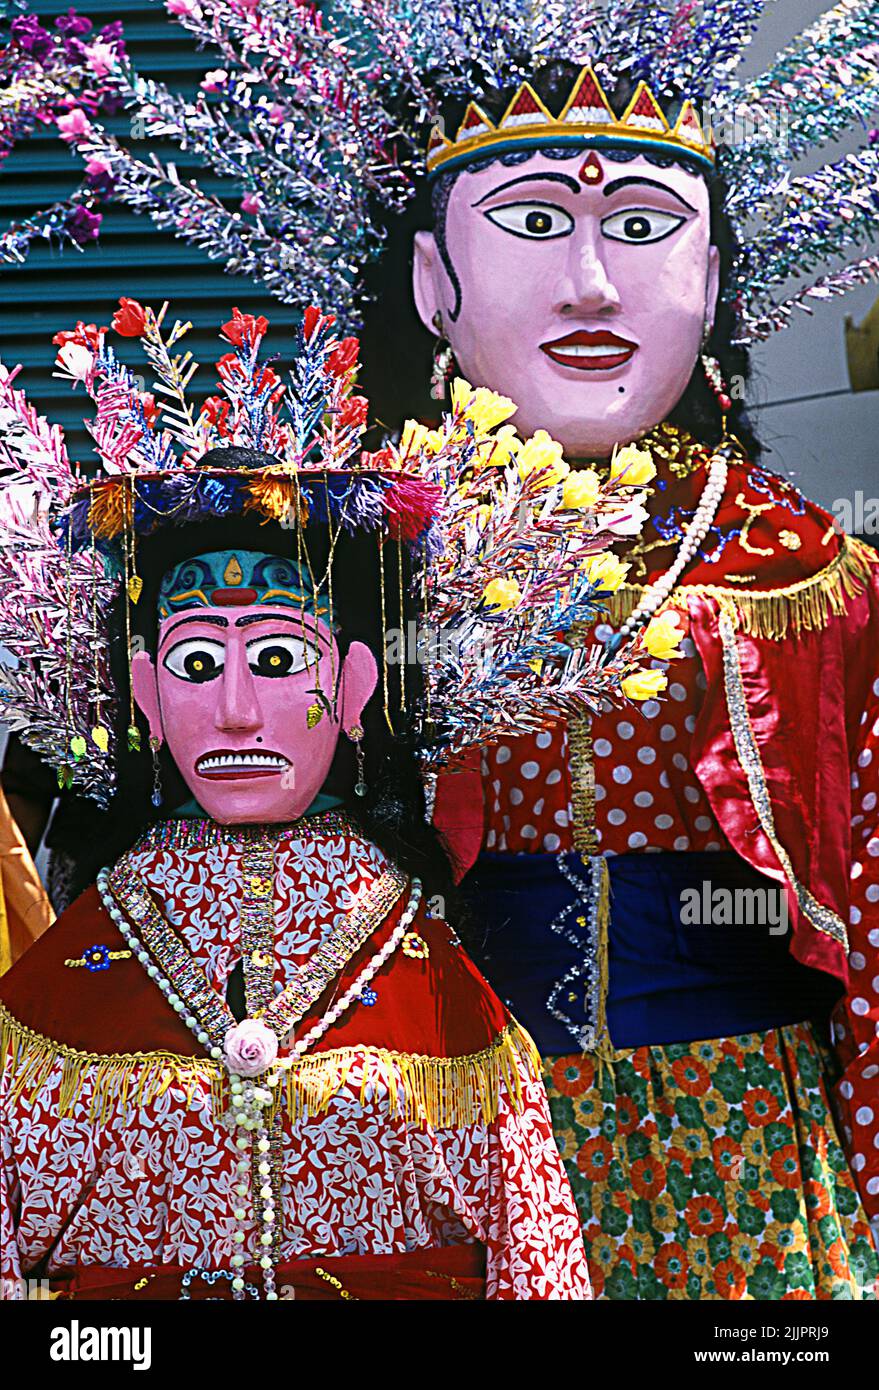 A vertical shot of two large puppet figures called Ondel-ondel in Jakarta, Indonesia Stock Photo